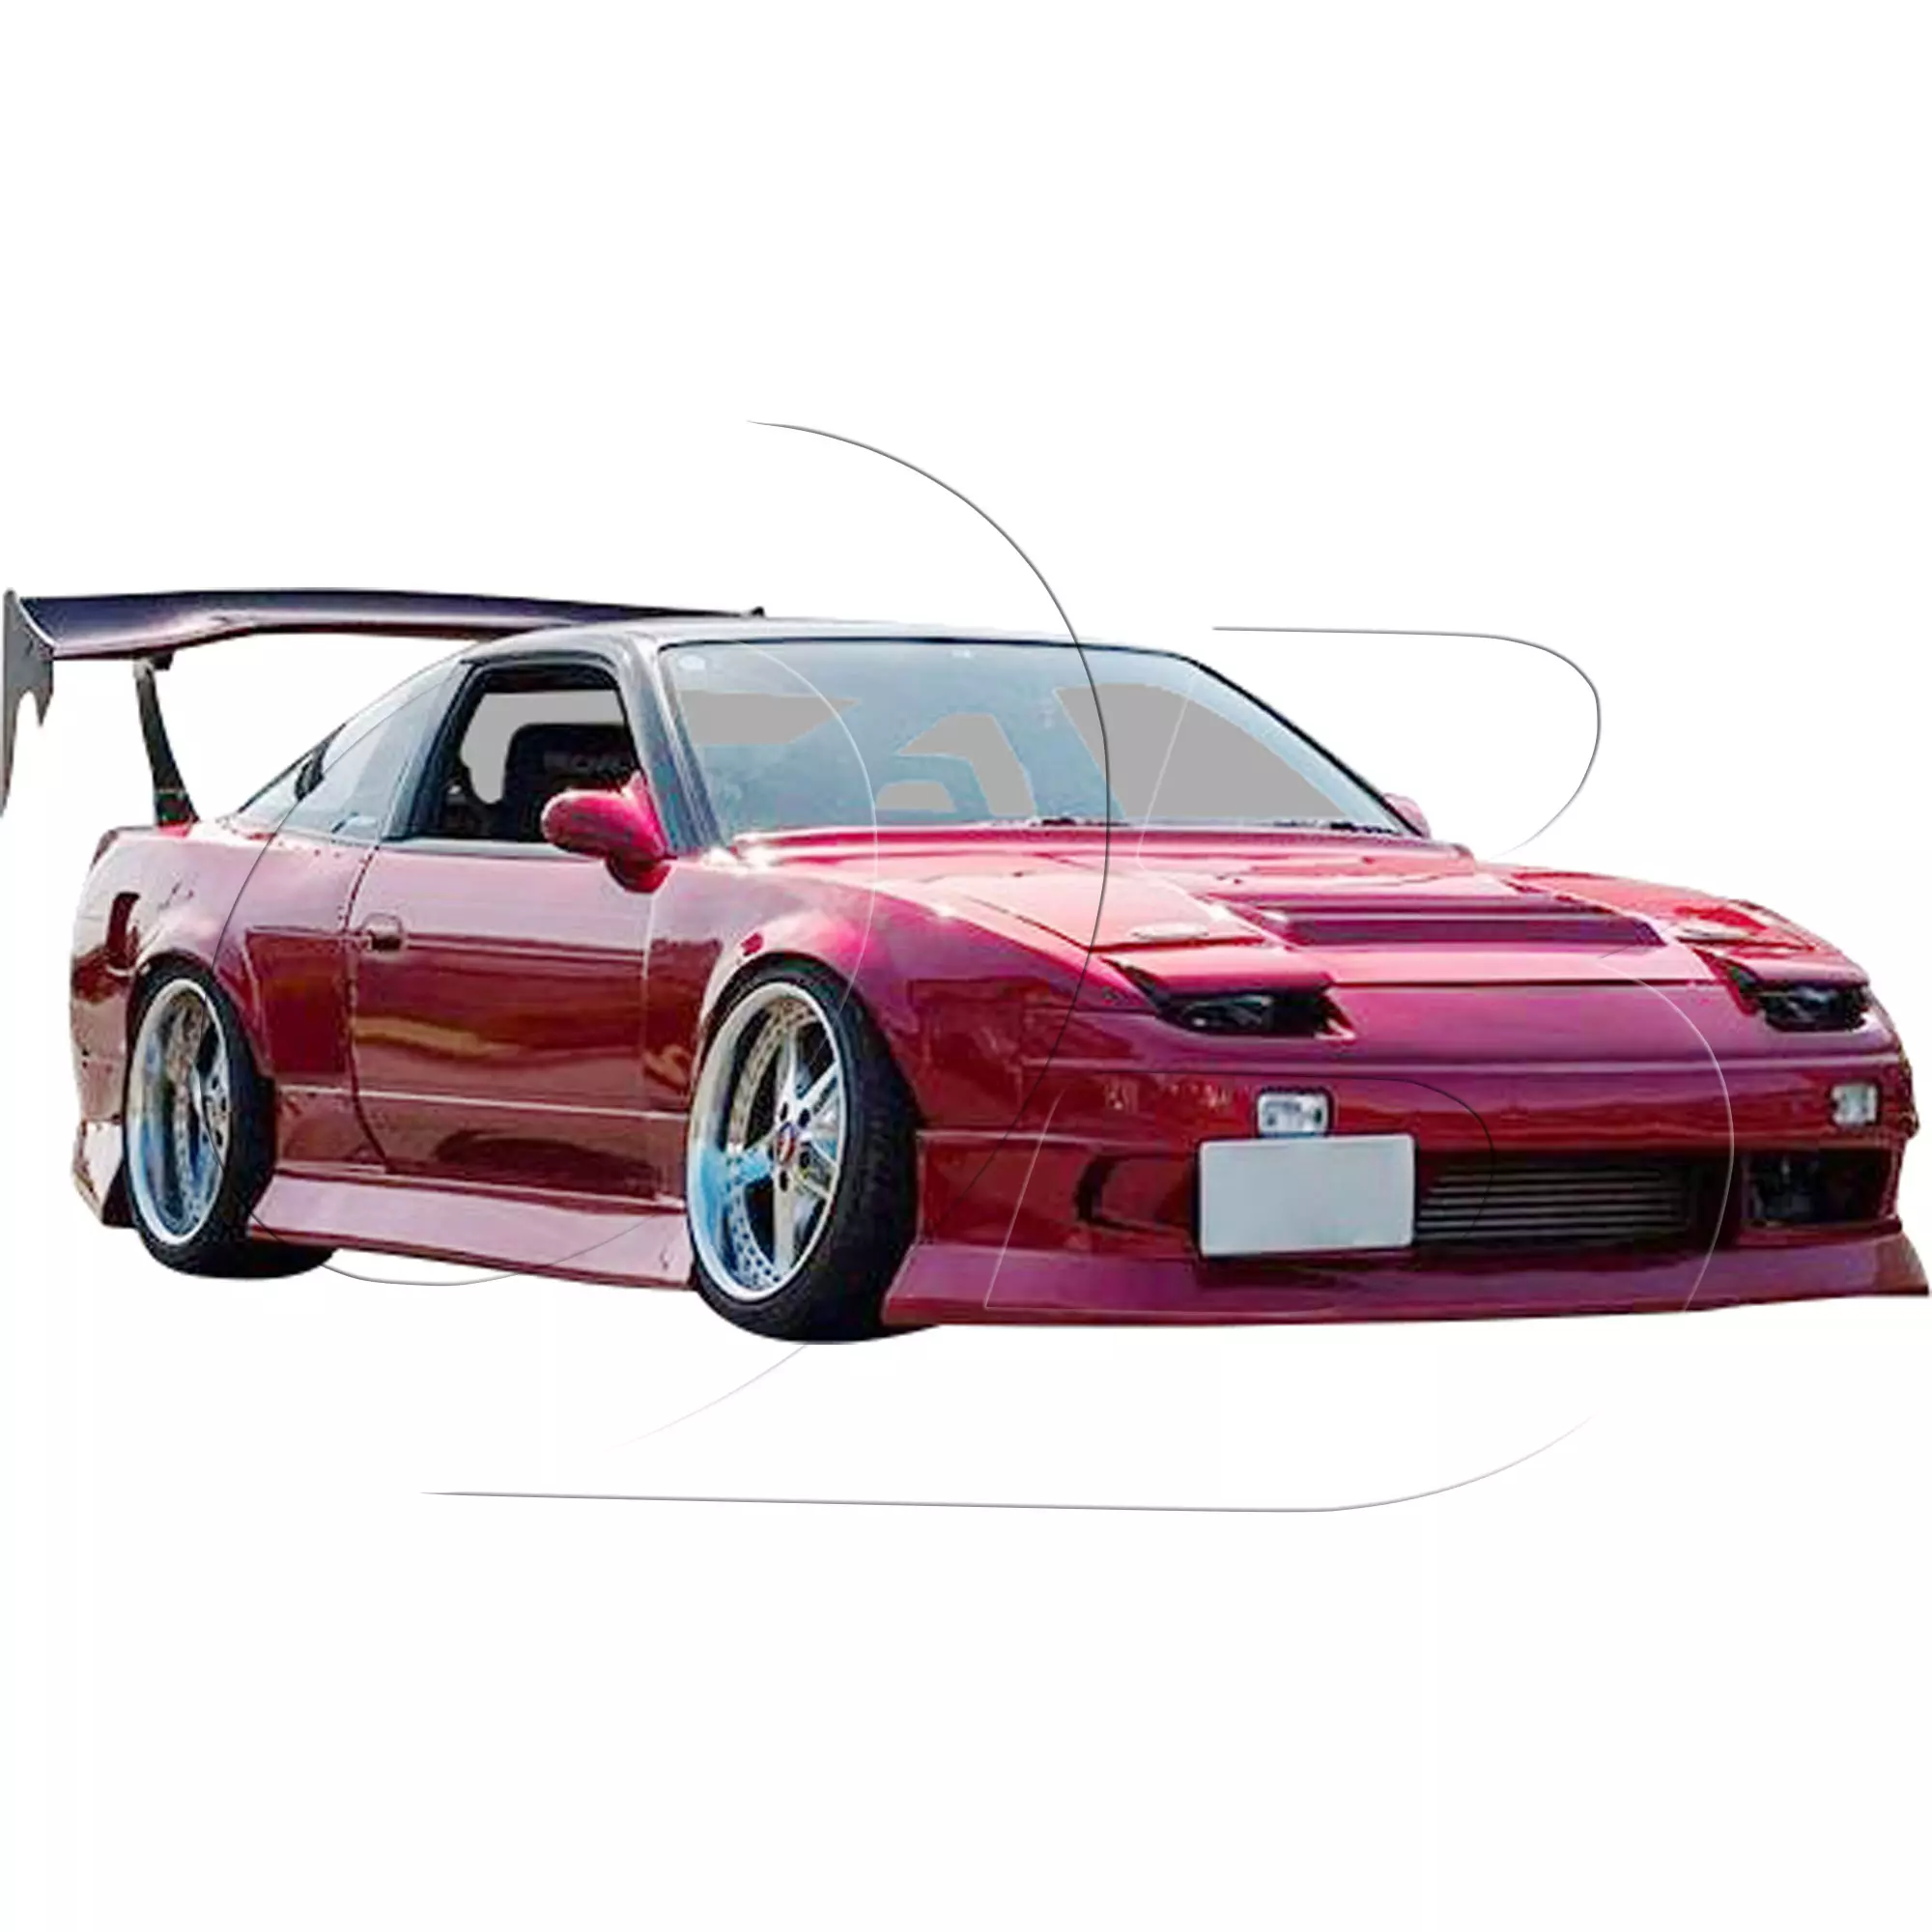 KBD Urethane Bsport2 Style 4pc Full Body Kit > Nissan 240SX 1989-1994 > 2dr Coupe - Image 22